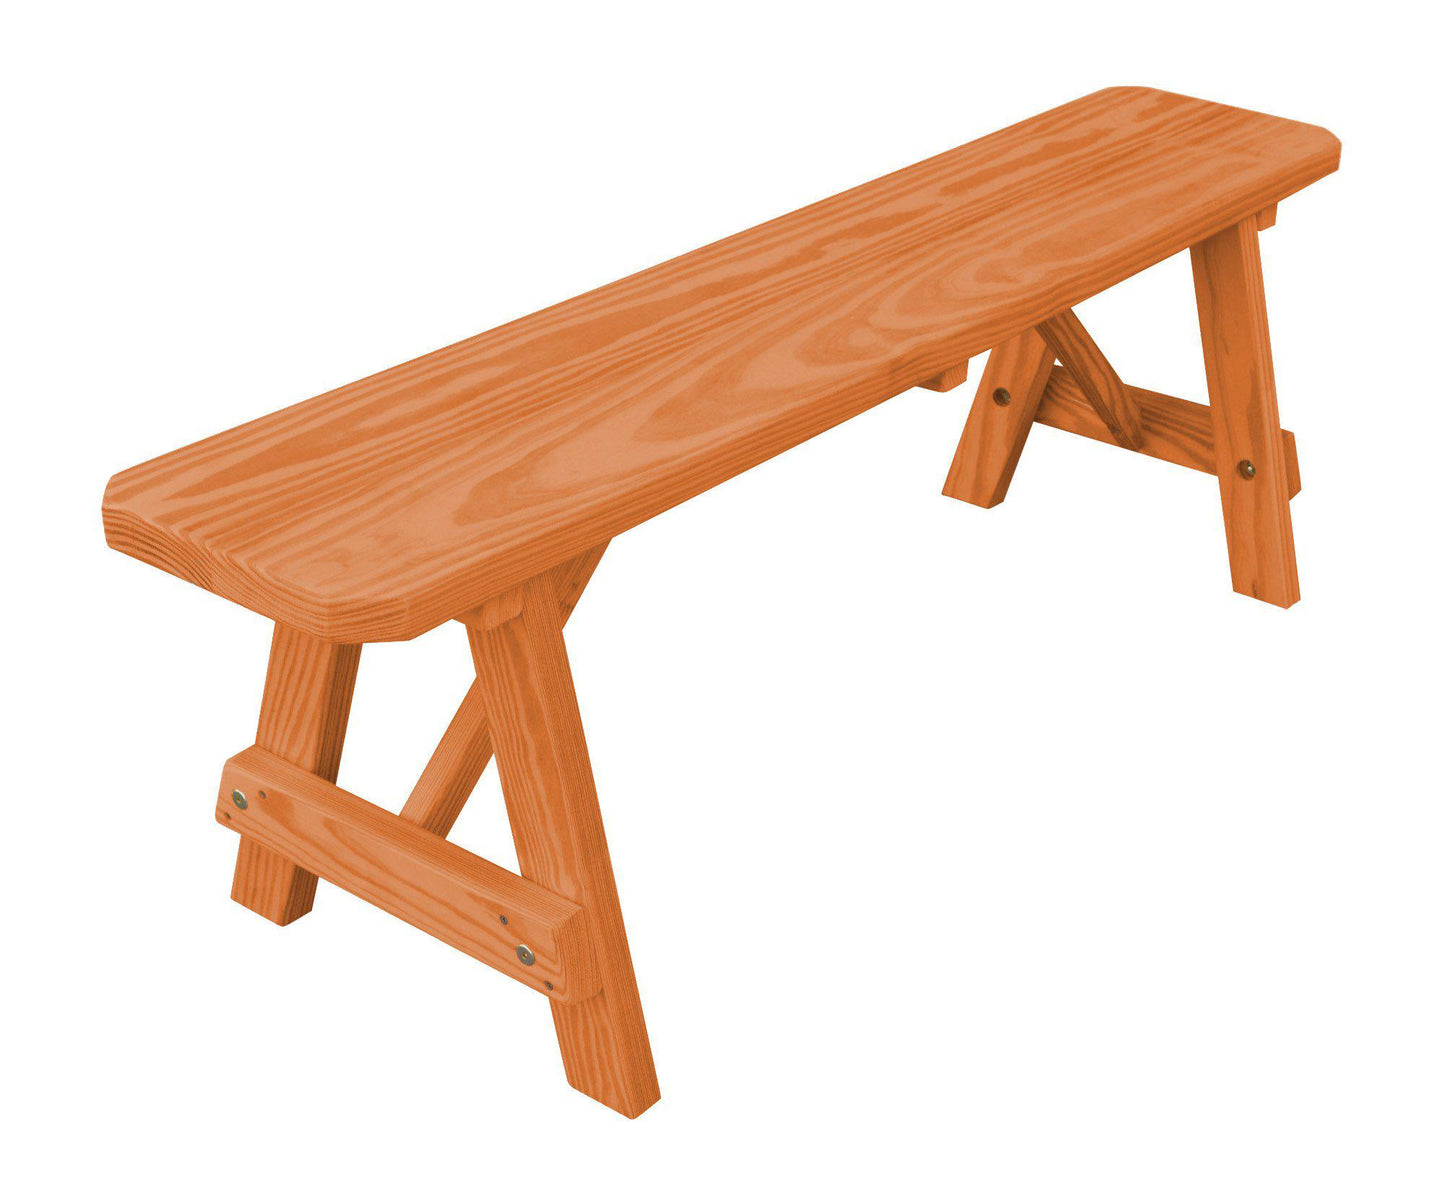 A&L Furniture Co. Yellow Pine 55" Traditional Bench Only - LEAD TIME TO SHIP 10 BUSINESS DAYS